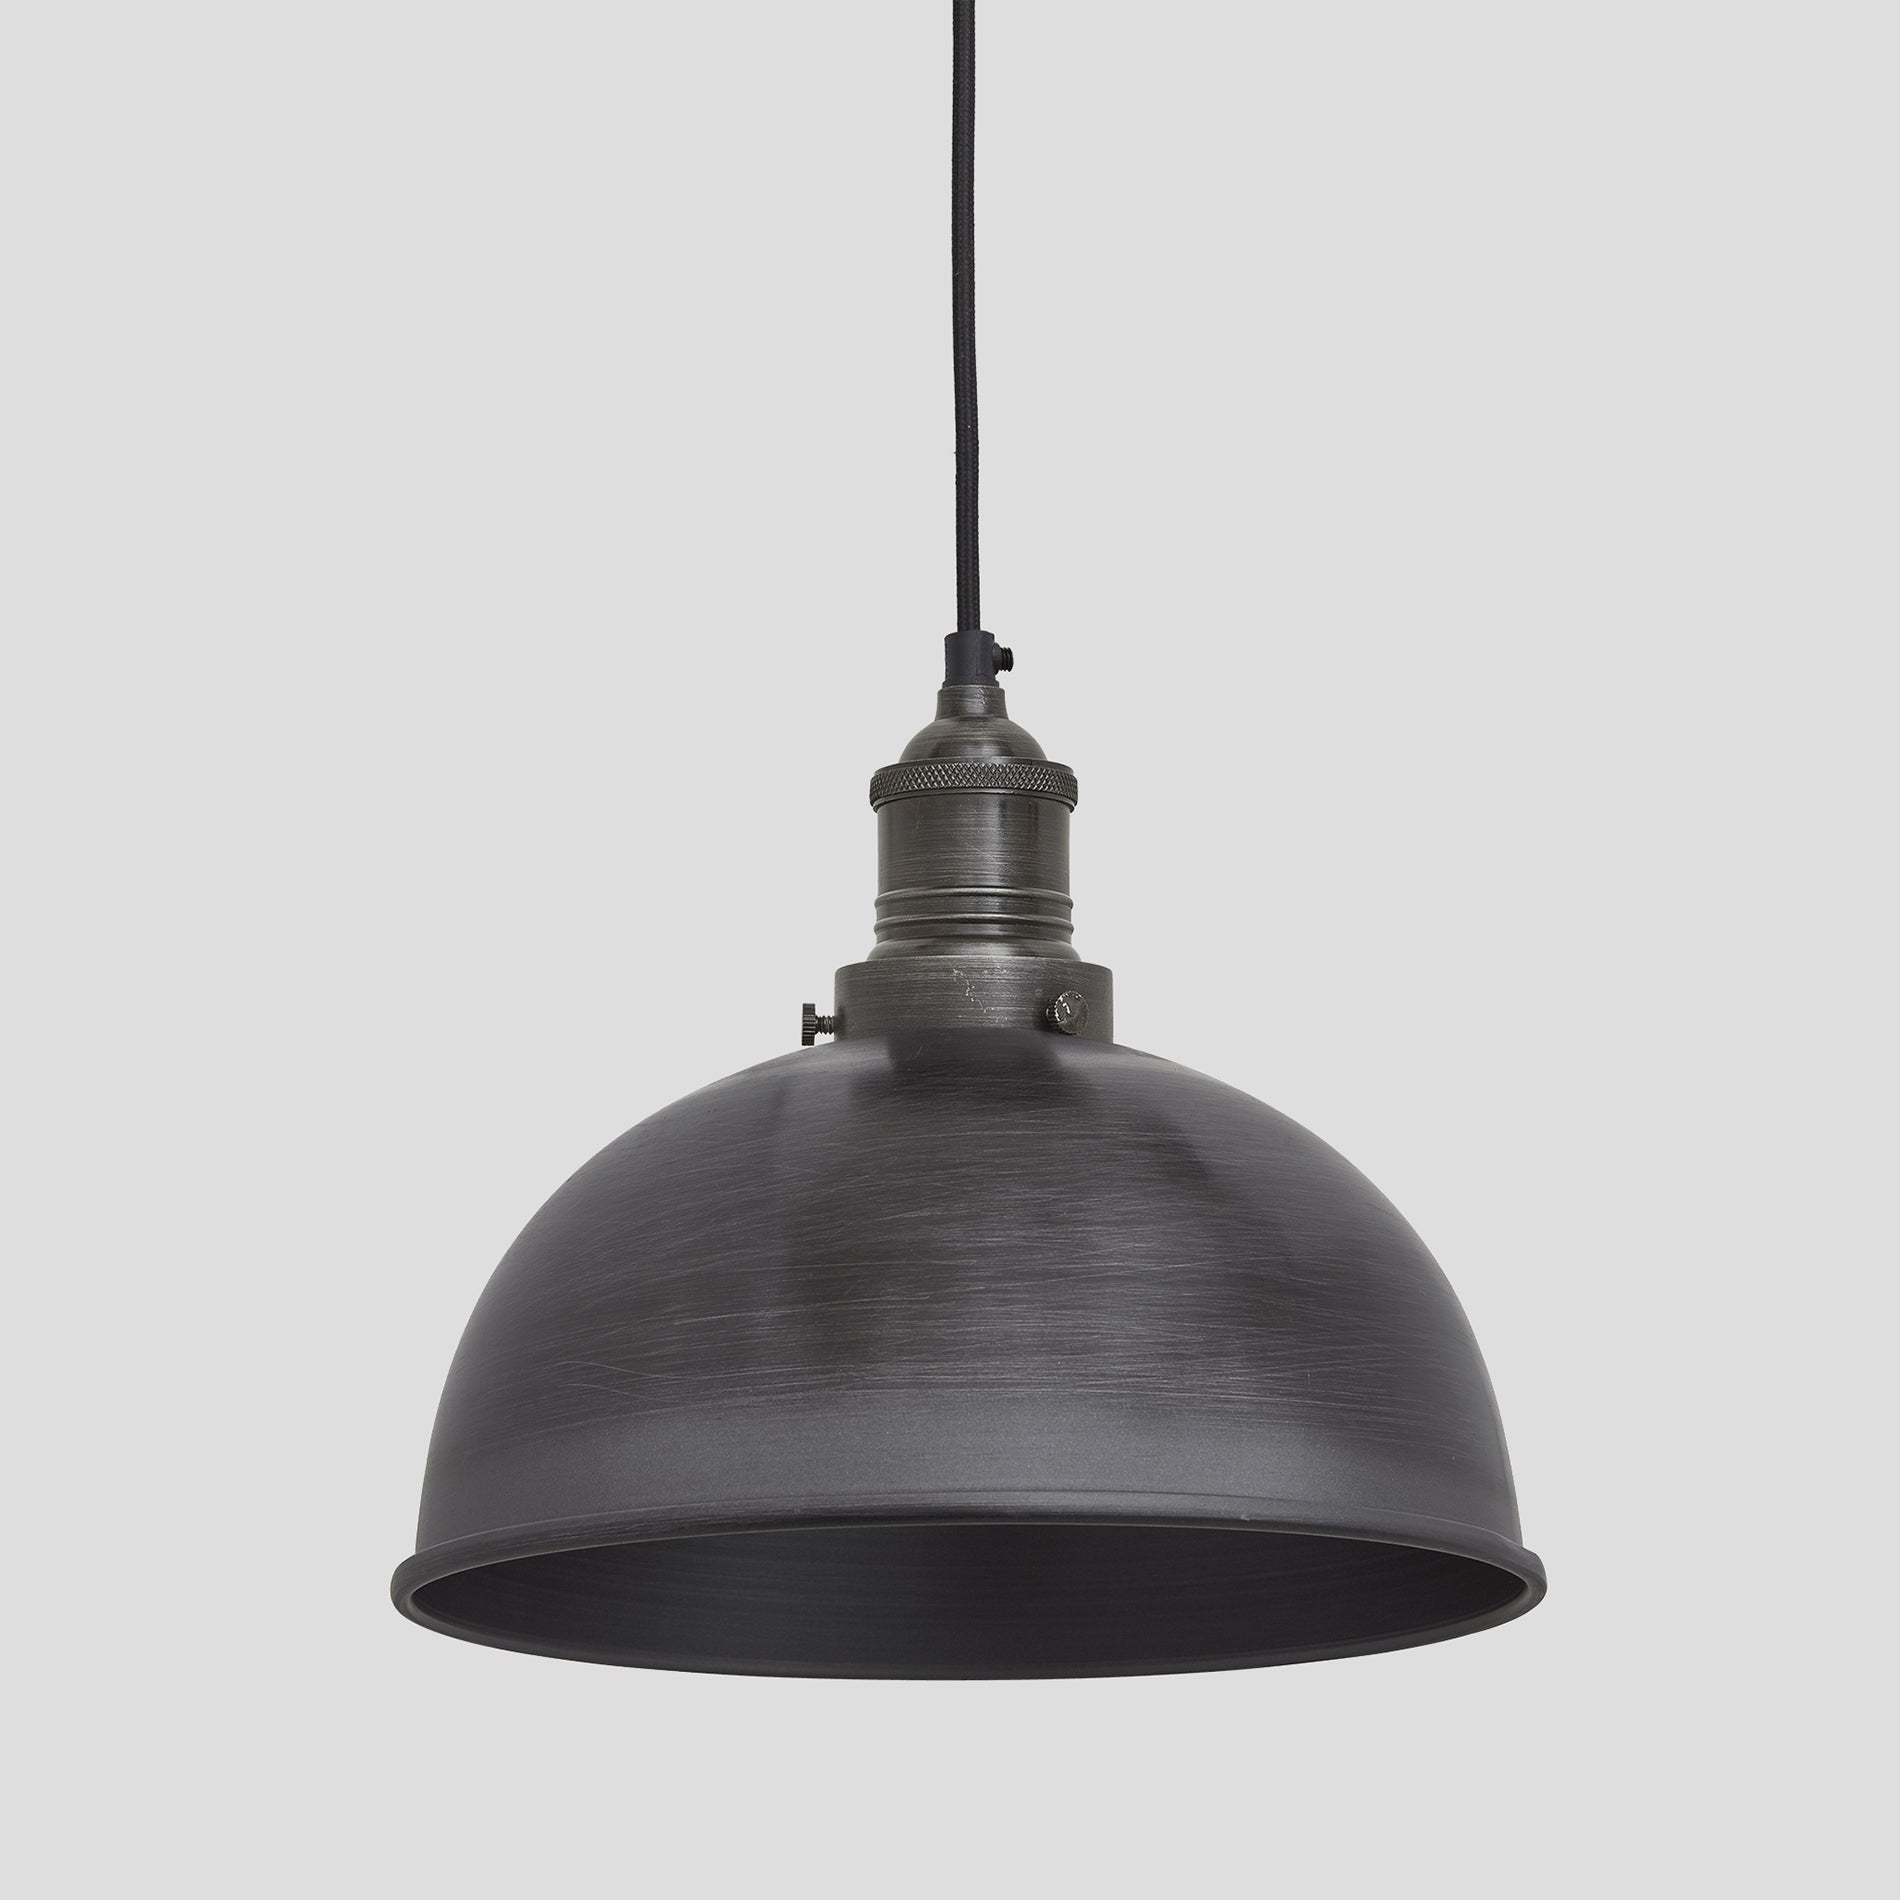 Brooklyn Dome Pendant Light - 8 Inch - Pewter Industville BR-DP8-P-PH